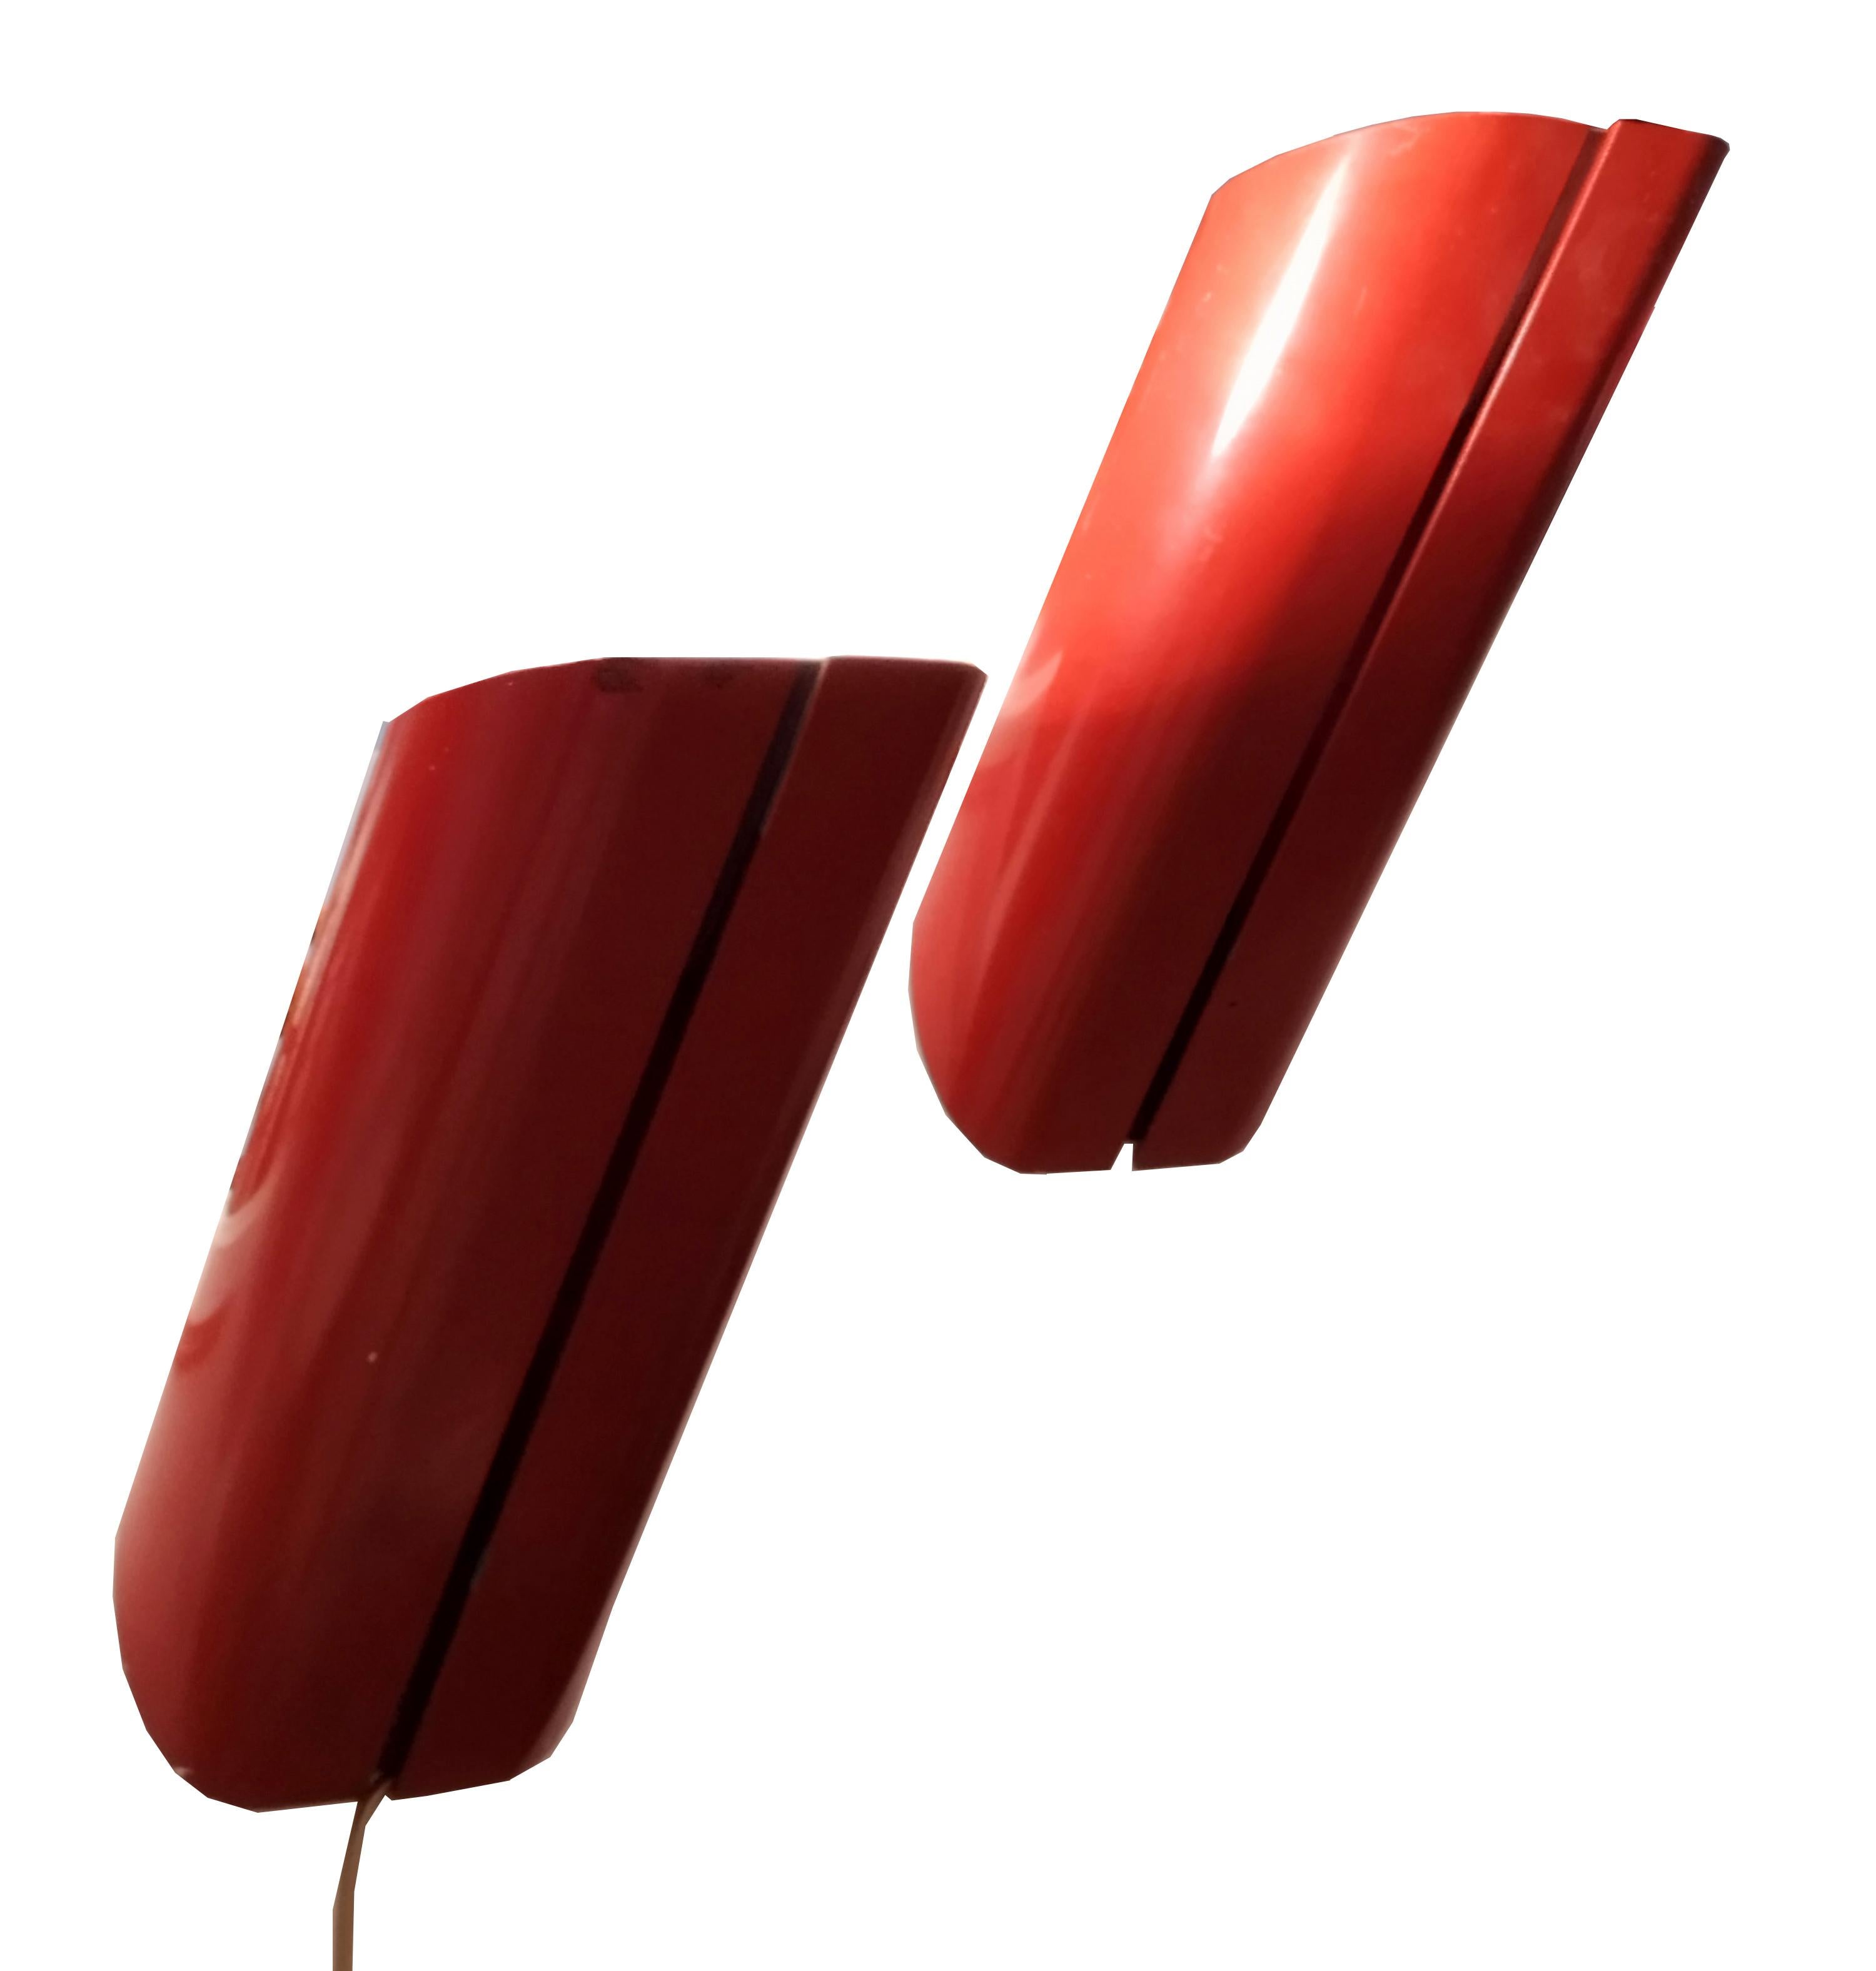 Designed in the late 1970s by Gianfranco Frattini, Megaron is a wall lamp with a minimal look composed of a burgundy-red lacquered aluminum tube with a resined steel base.
Light source: 1 tubular halogen bulb max. 300W. - R7s socket.
The product